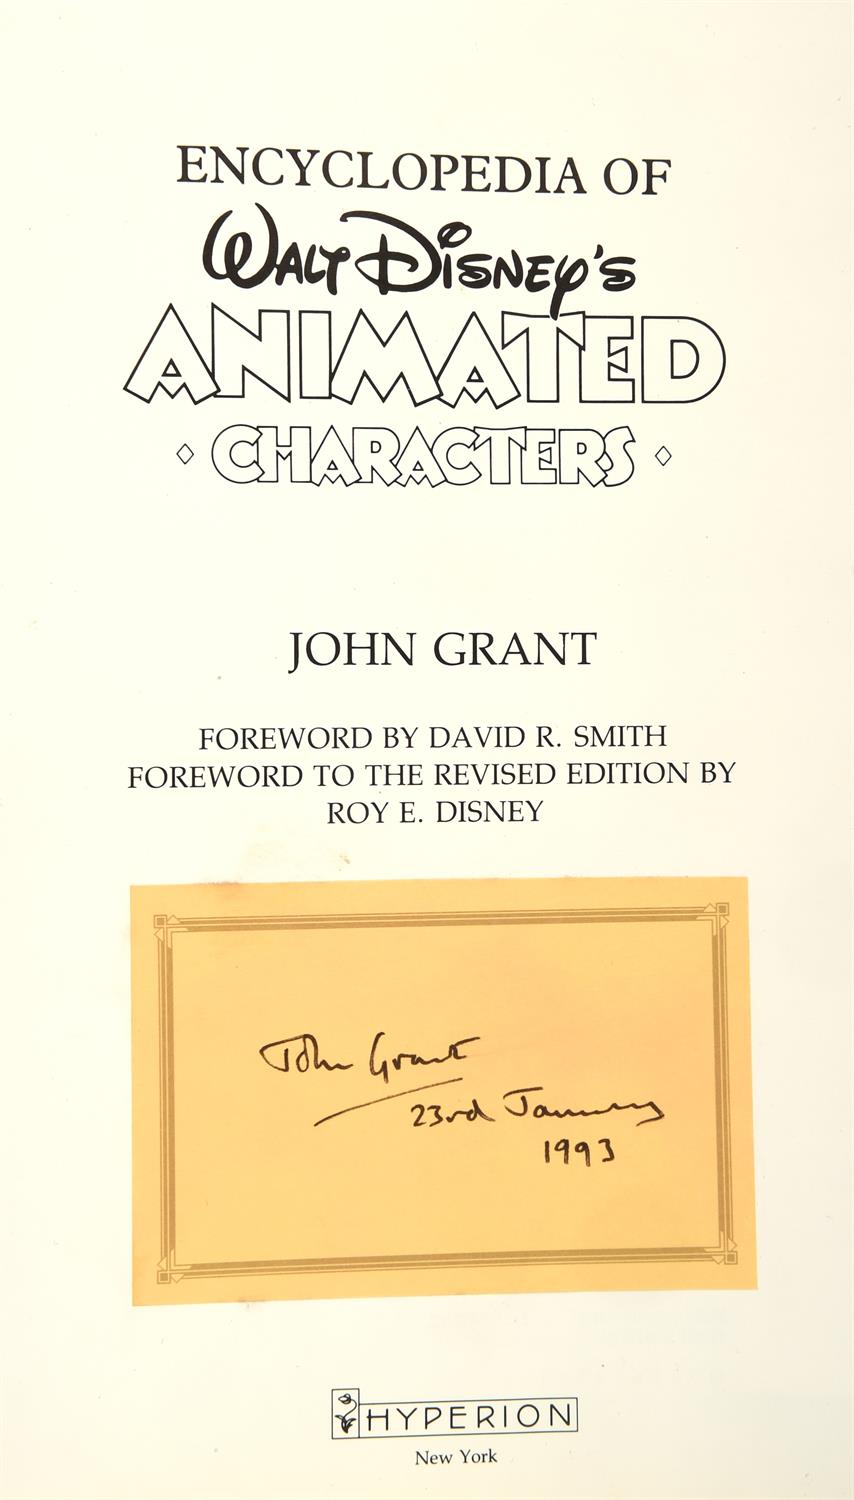 Walt Disney, Animation, and related – Five first edition hardback books, three of which are Signed - Image 4 of 4